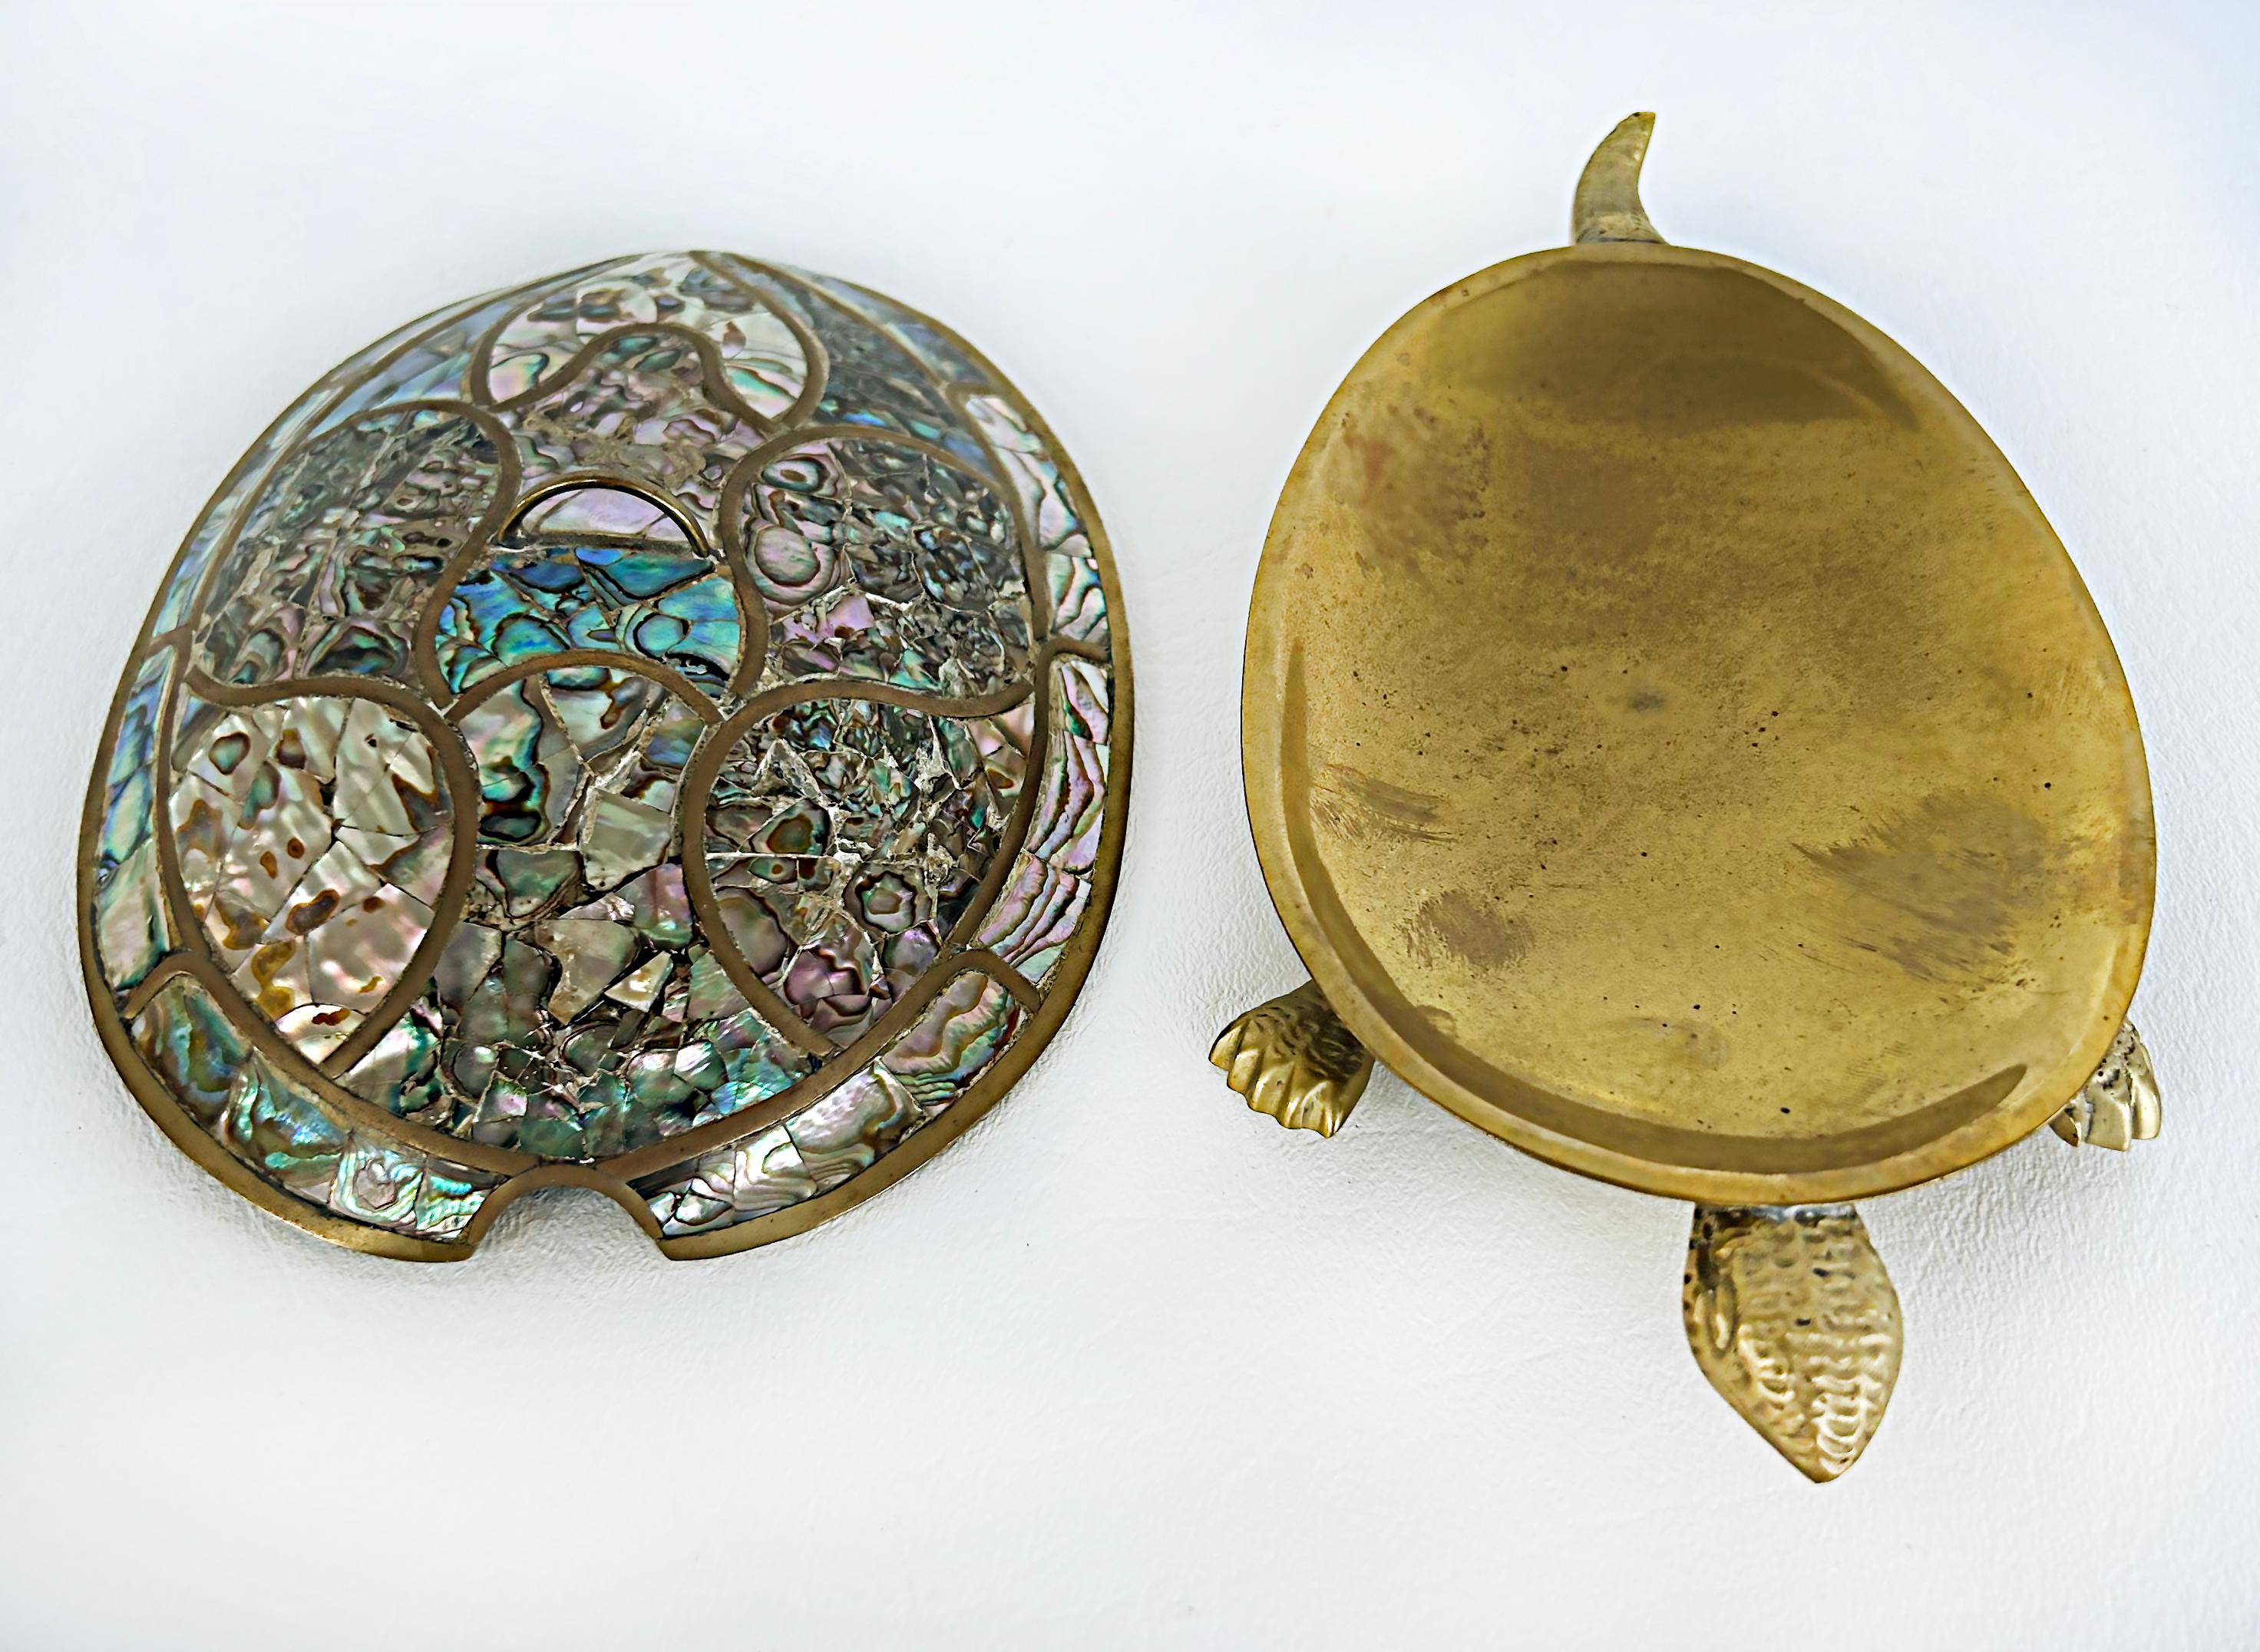 Mexican 1960s Mid-Century Modern Abalone Shell Brass Turtle Dish with Cover 

Offered for sale is an unusual 1960s brass turtle-form dish with a cover that is inset with abalone shell pieces from Mexico. The pieces are in the style of Los Castillo